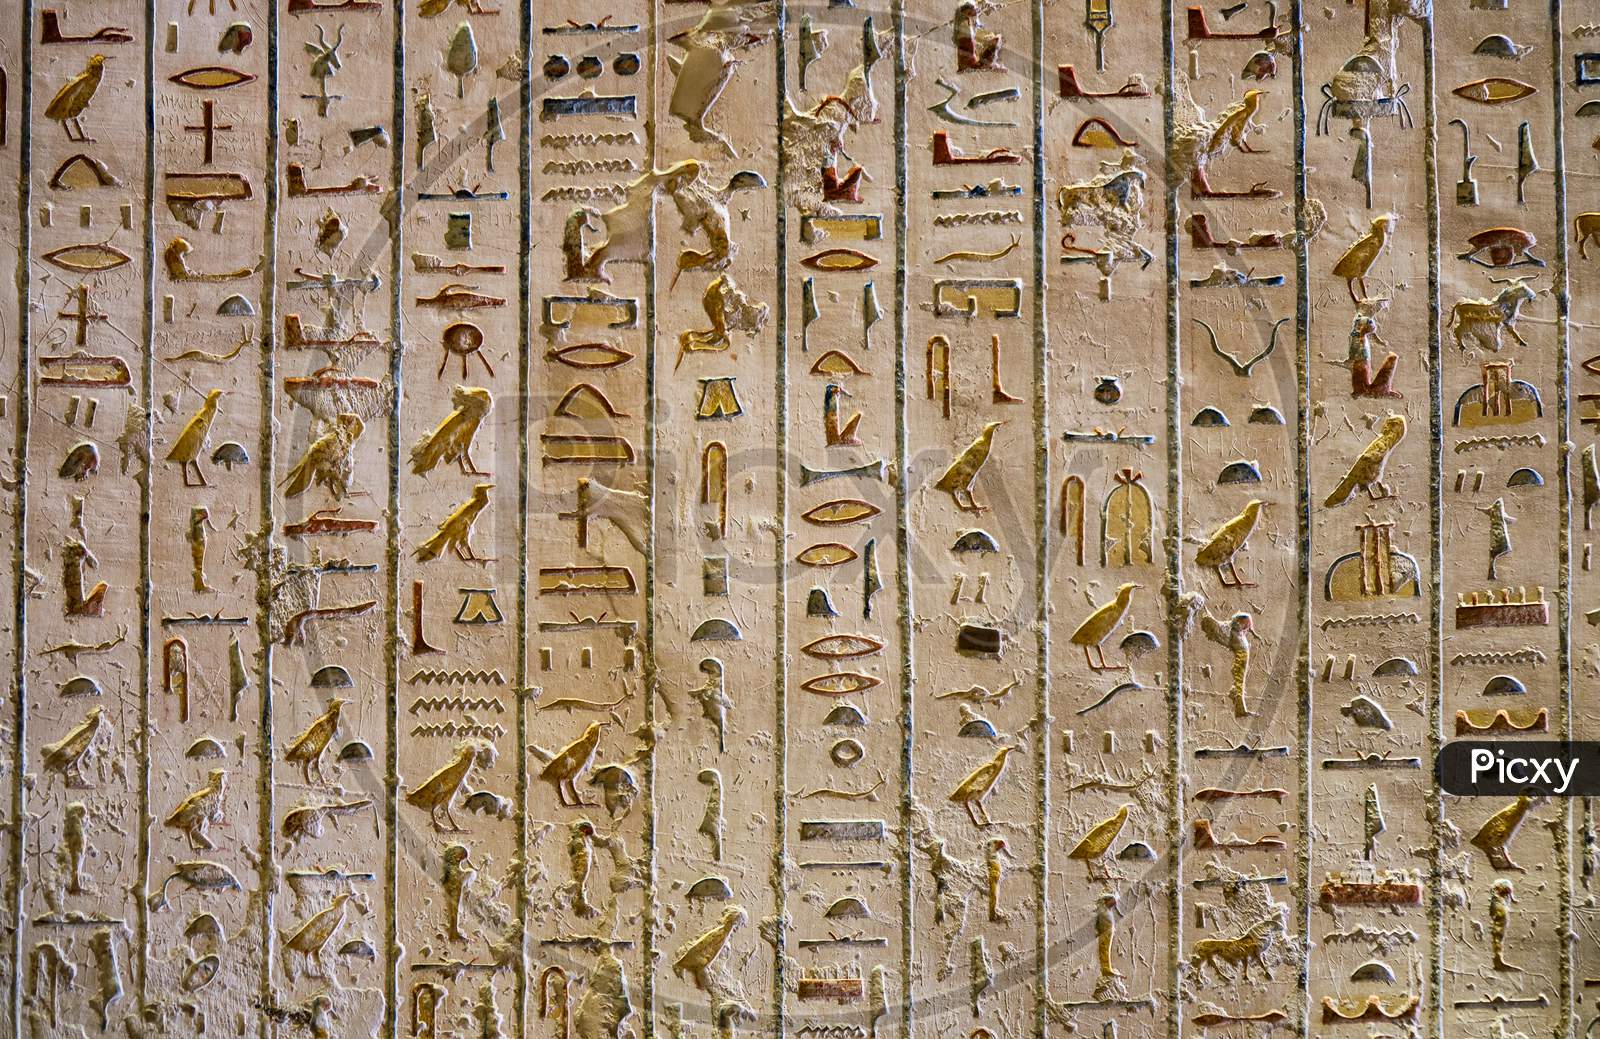 Ancient Paintings And Egyptian Hieroglyphs At The Pharaoh Tomb In The Valley Of The Kings In Luxor, Egypt